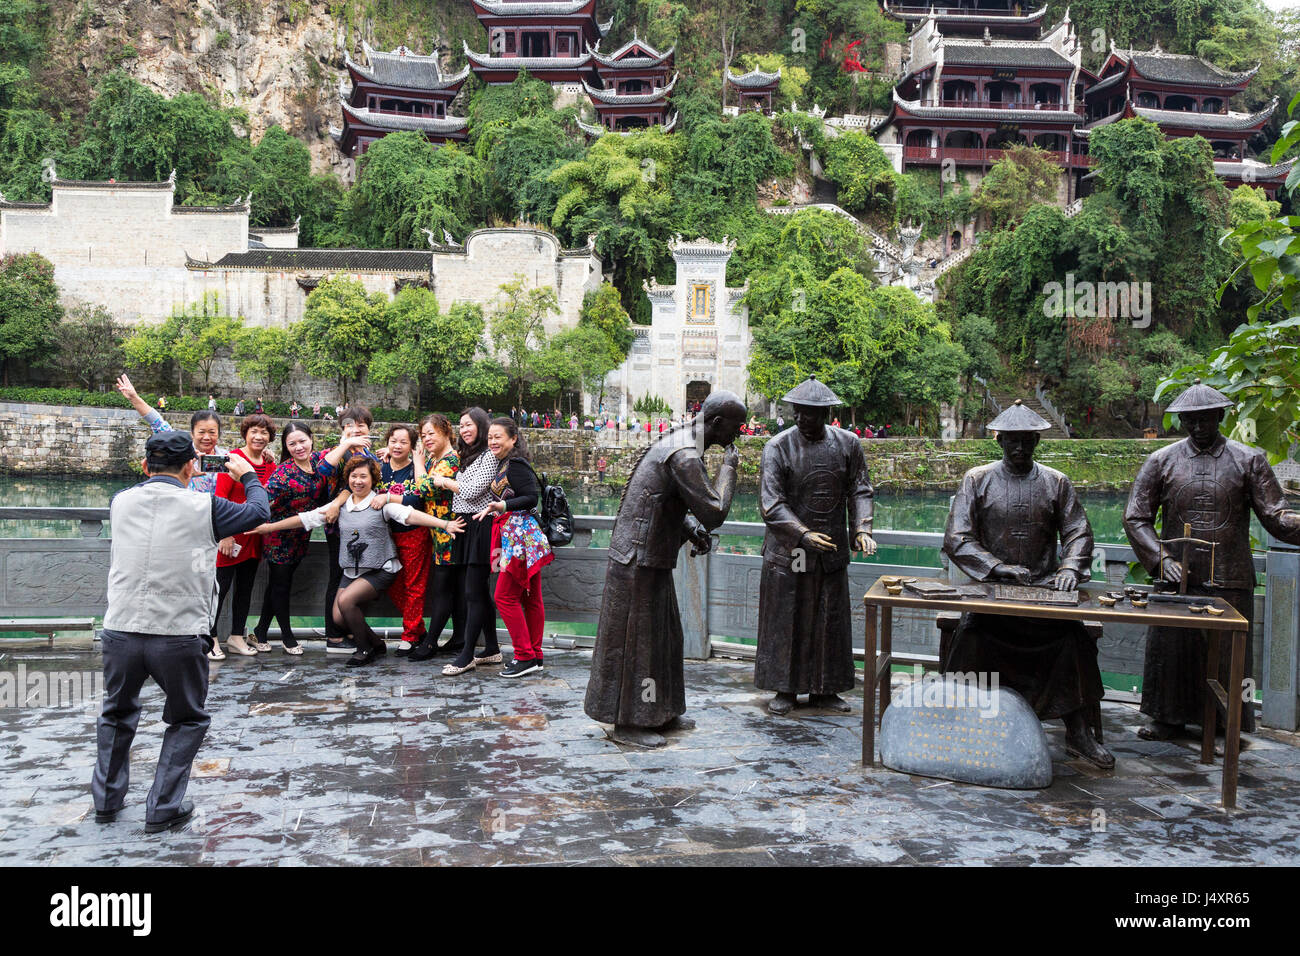 Zhenyuan, Guizhou, China.  Chinese Tourists Posing for Photo next to Sculpture Depicting Imperial Customs Agents. Stock Photo